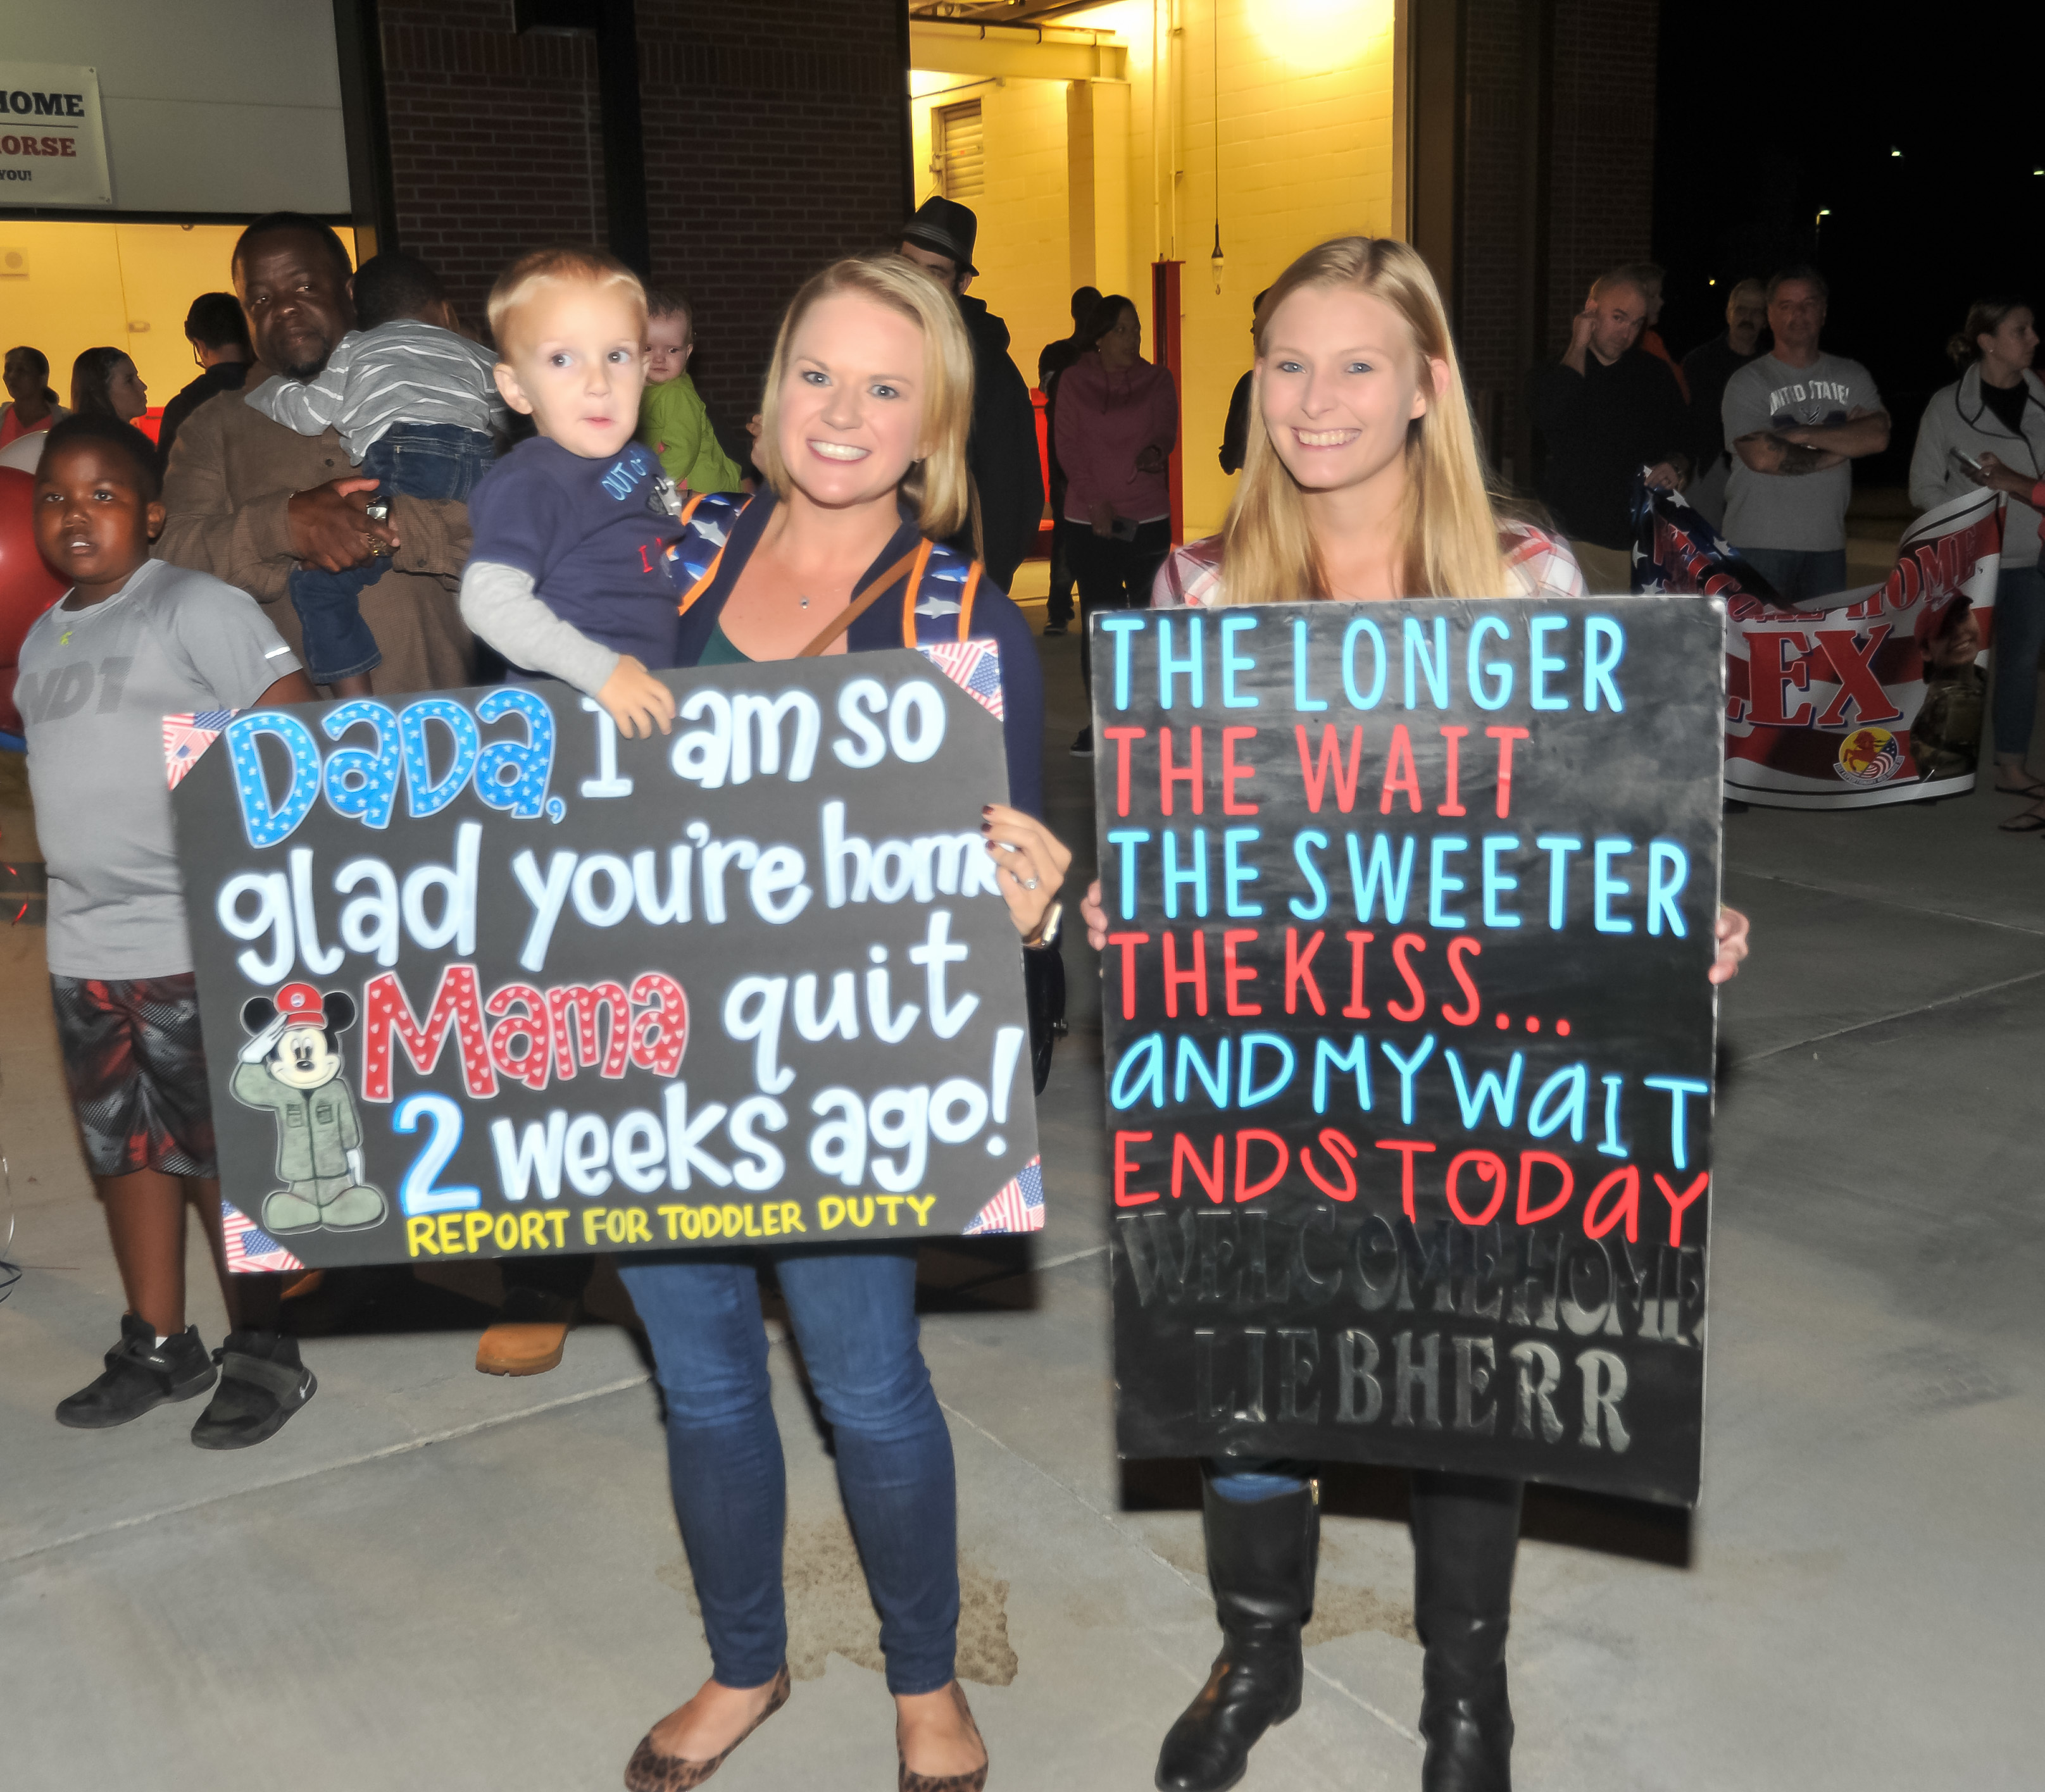 Great, real life ideas for homecoming signs. Keeping for the next deployment. #military #militaryfamily #militaryspouse #milspouse #milso #milspo #inspiration #homecomingsign #crafty #family #deployment #deploymentlife #deploymentsucks